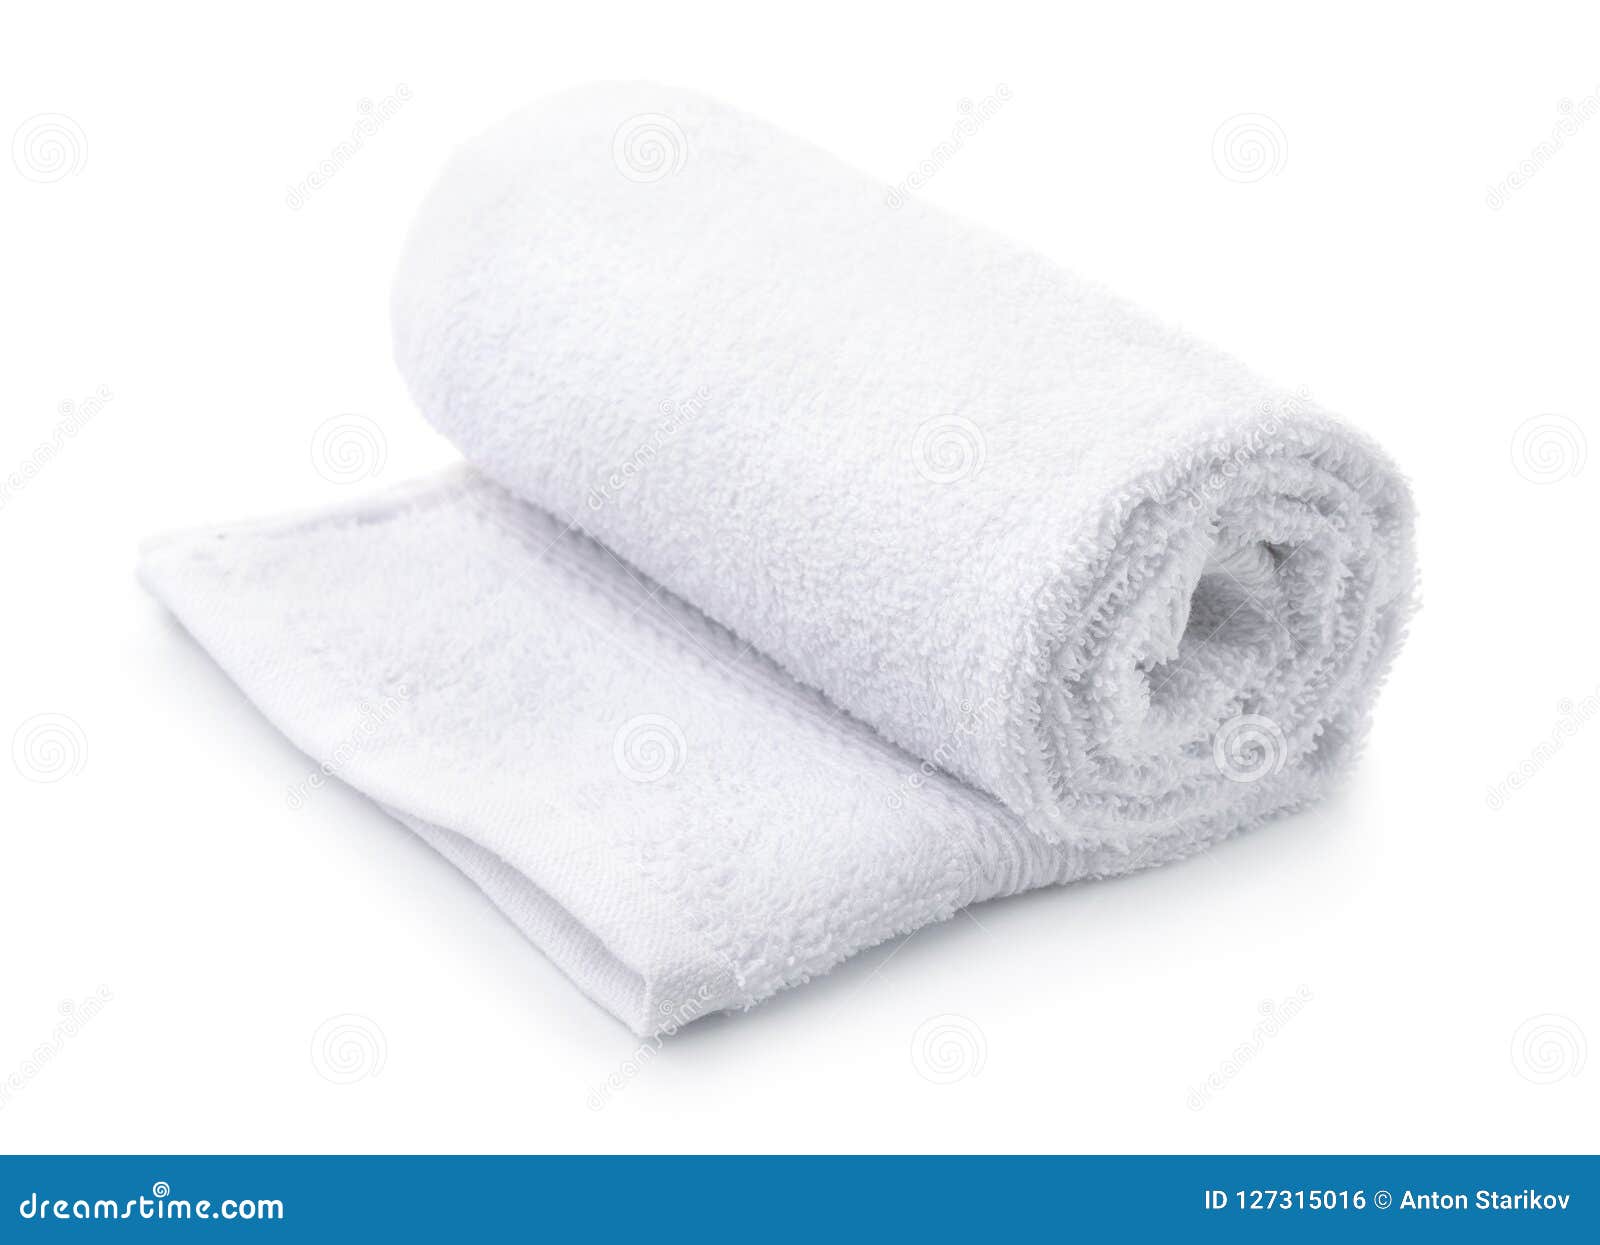 rolled up white terry towel